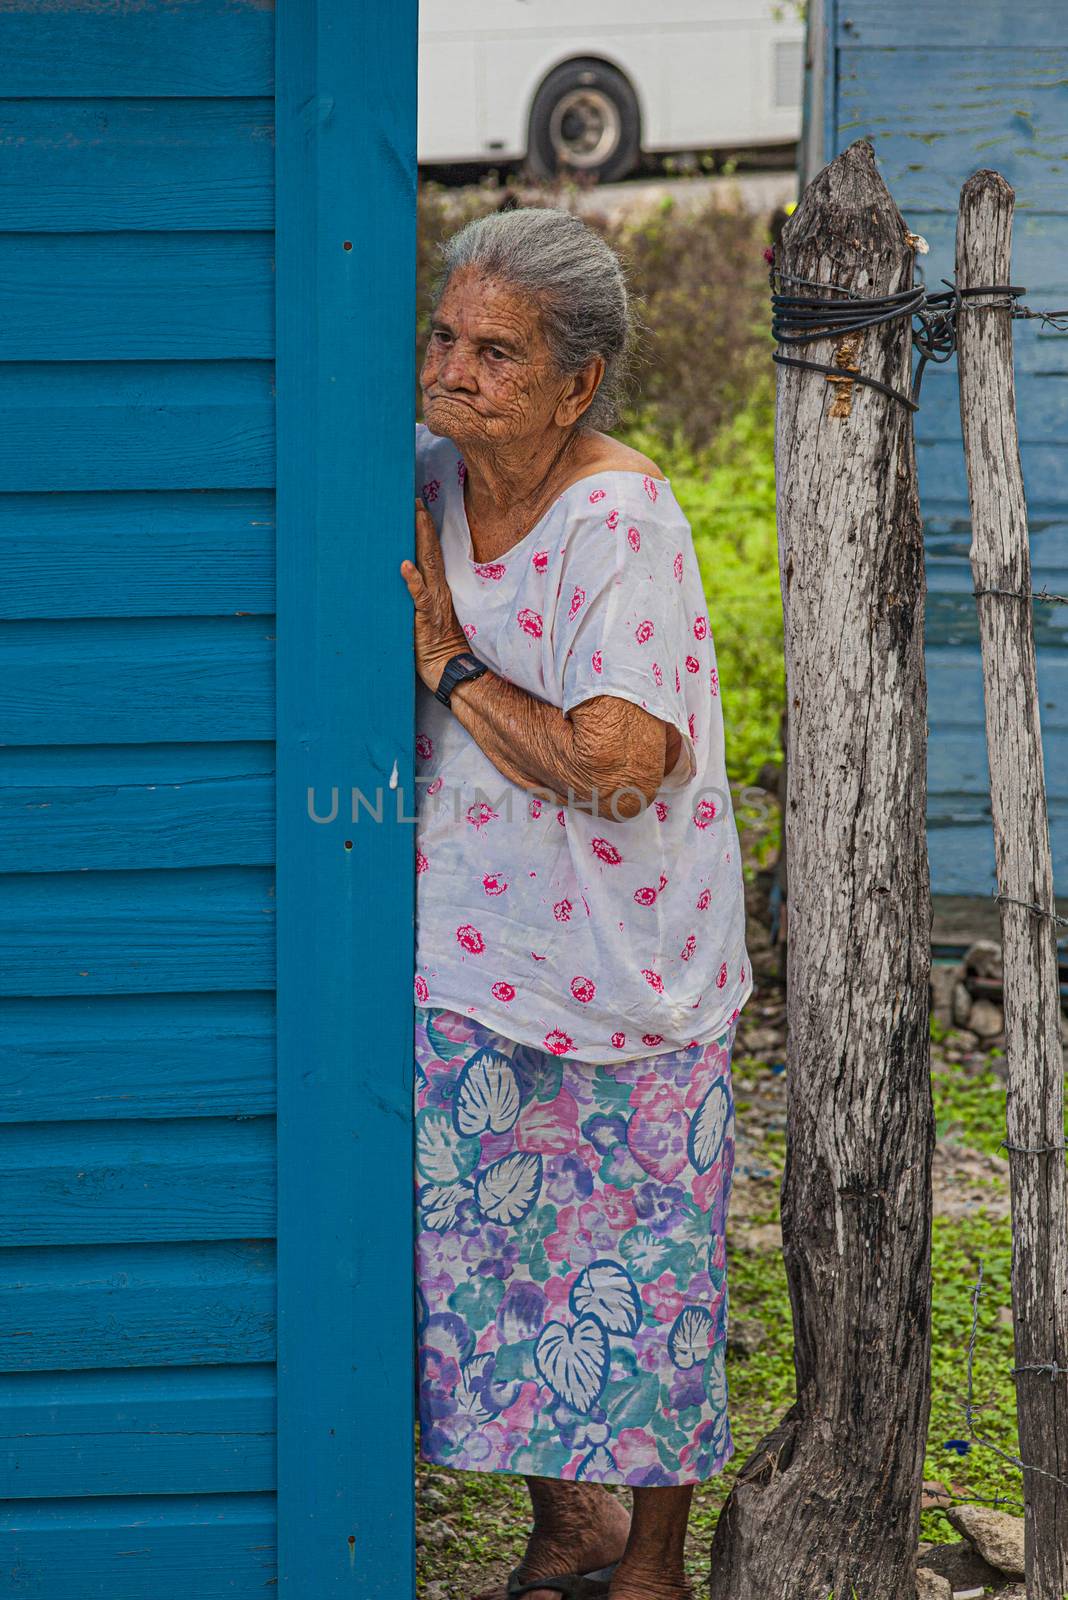 BAYAHIBE, DOMINICAN REPUBLIC 26 JANUARY 2020: Old Dominican lady on the street